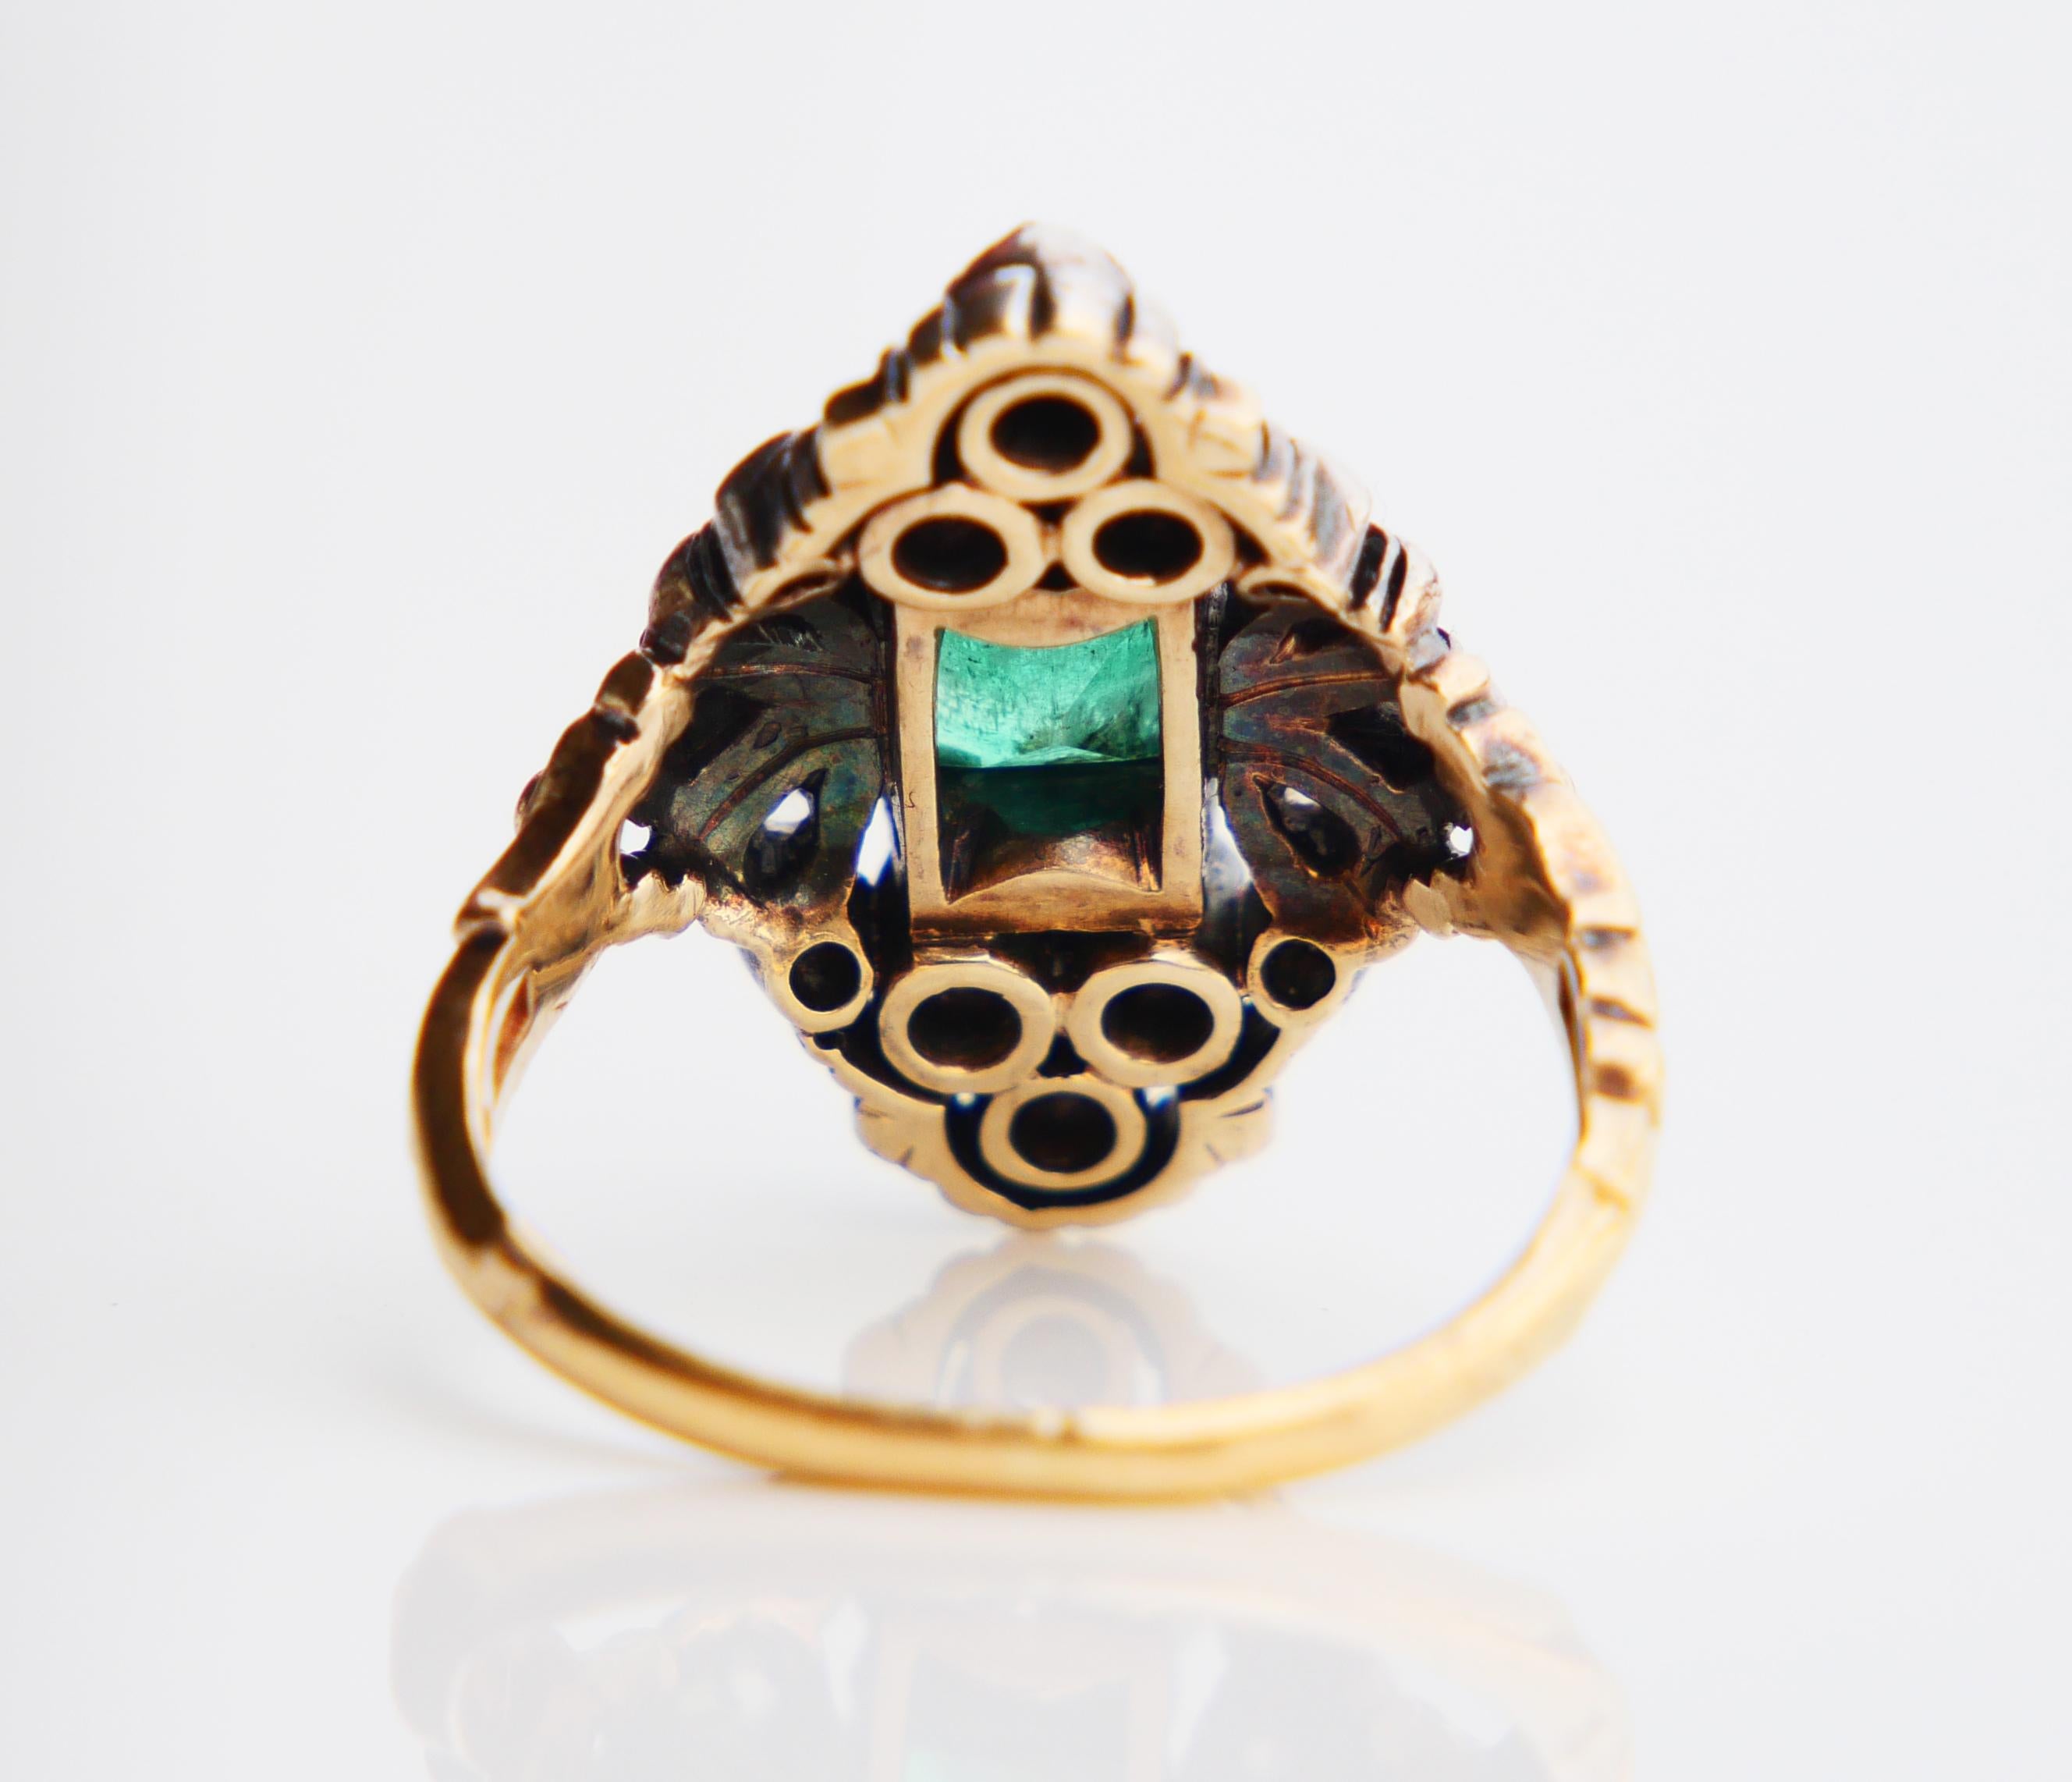 1931 old Ring 1ct Emerald 0.5ctw Diamonds solid 18K Gold Silver ØUS5.5/6.6gr For Sale 2